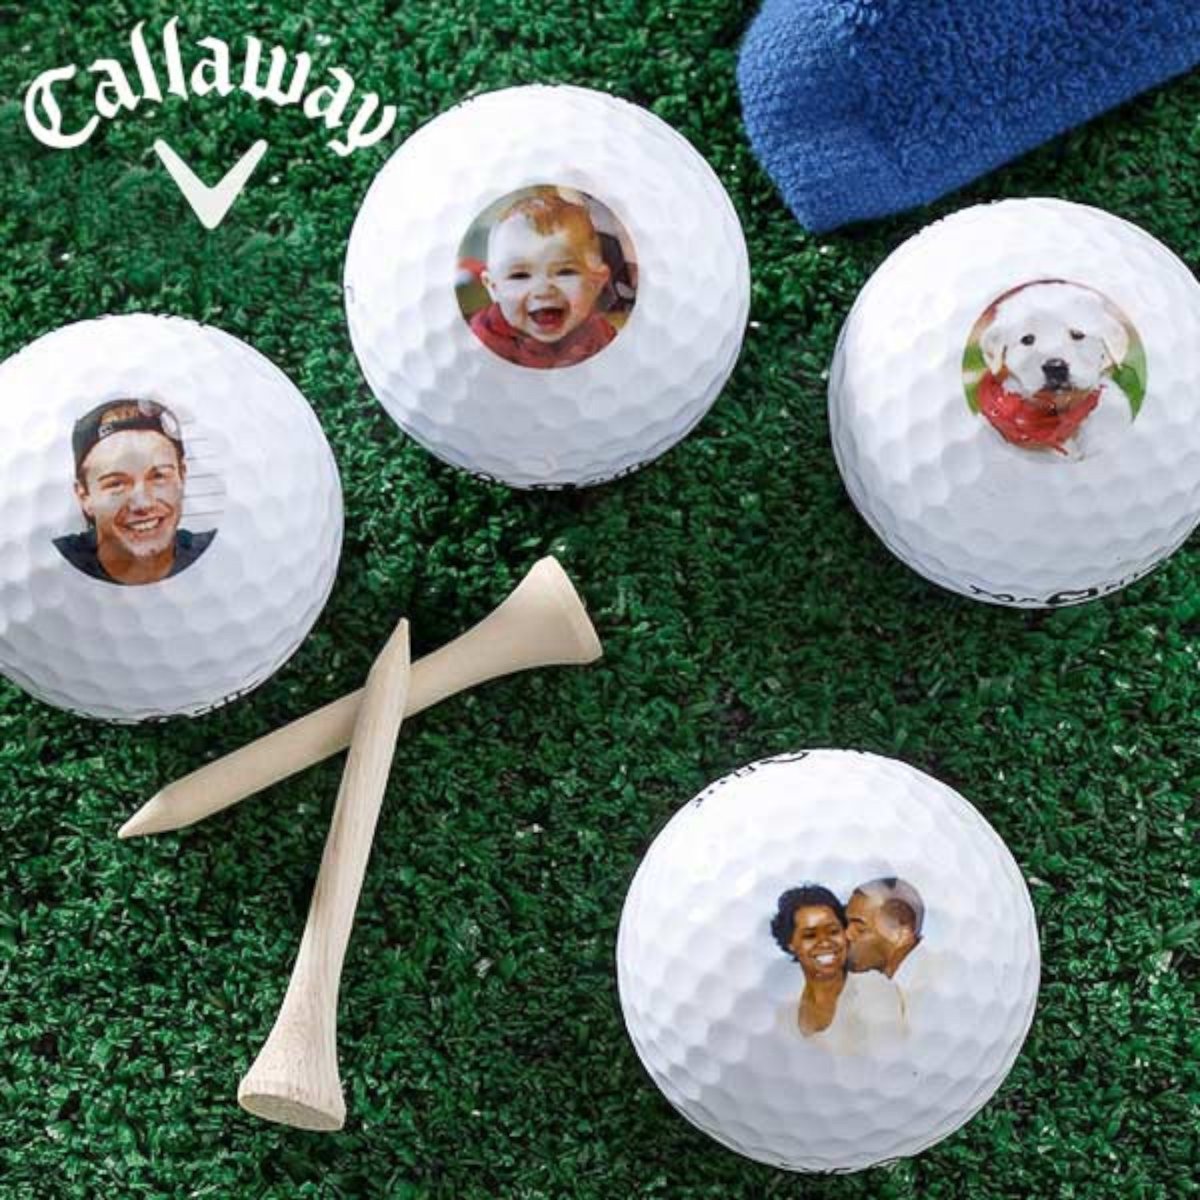 PHOTO: These golf balls are sure to score a few raised eyebrows, if not points.